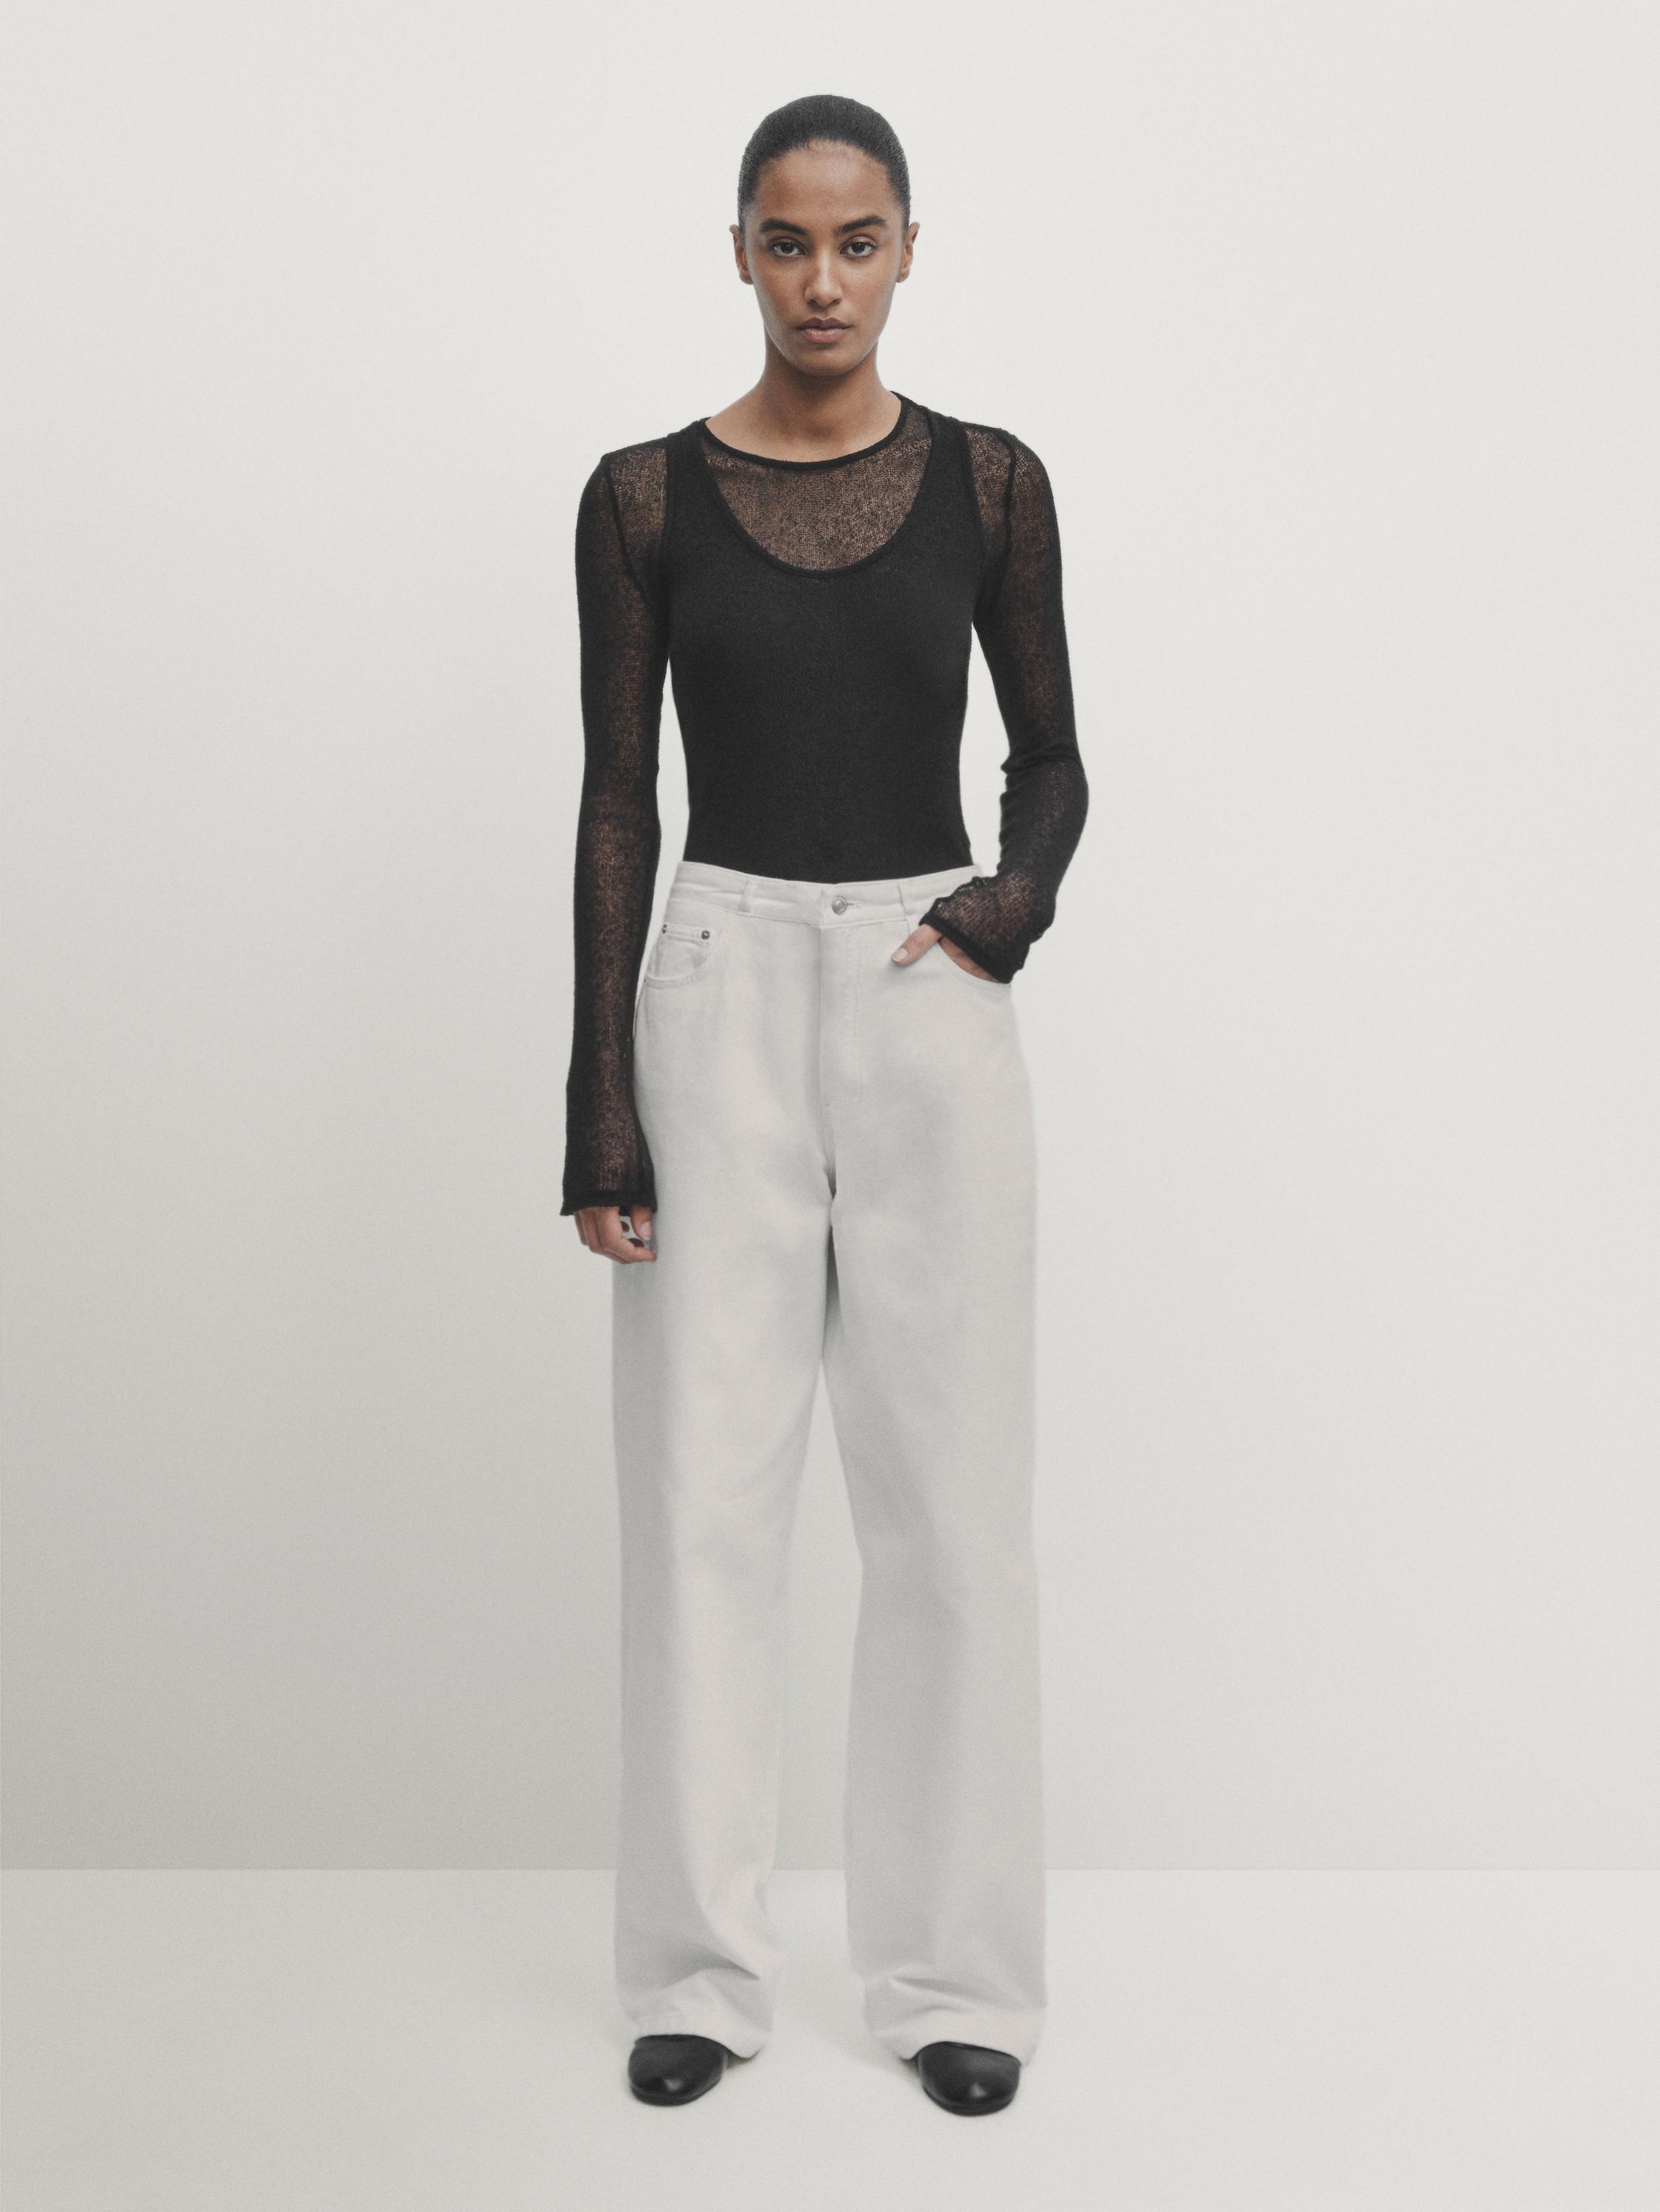 ZARA WOMAN NWT SS23 OYSTER WHITE HIGH-WAISTED PANTS ALL SIZES 7901/532